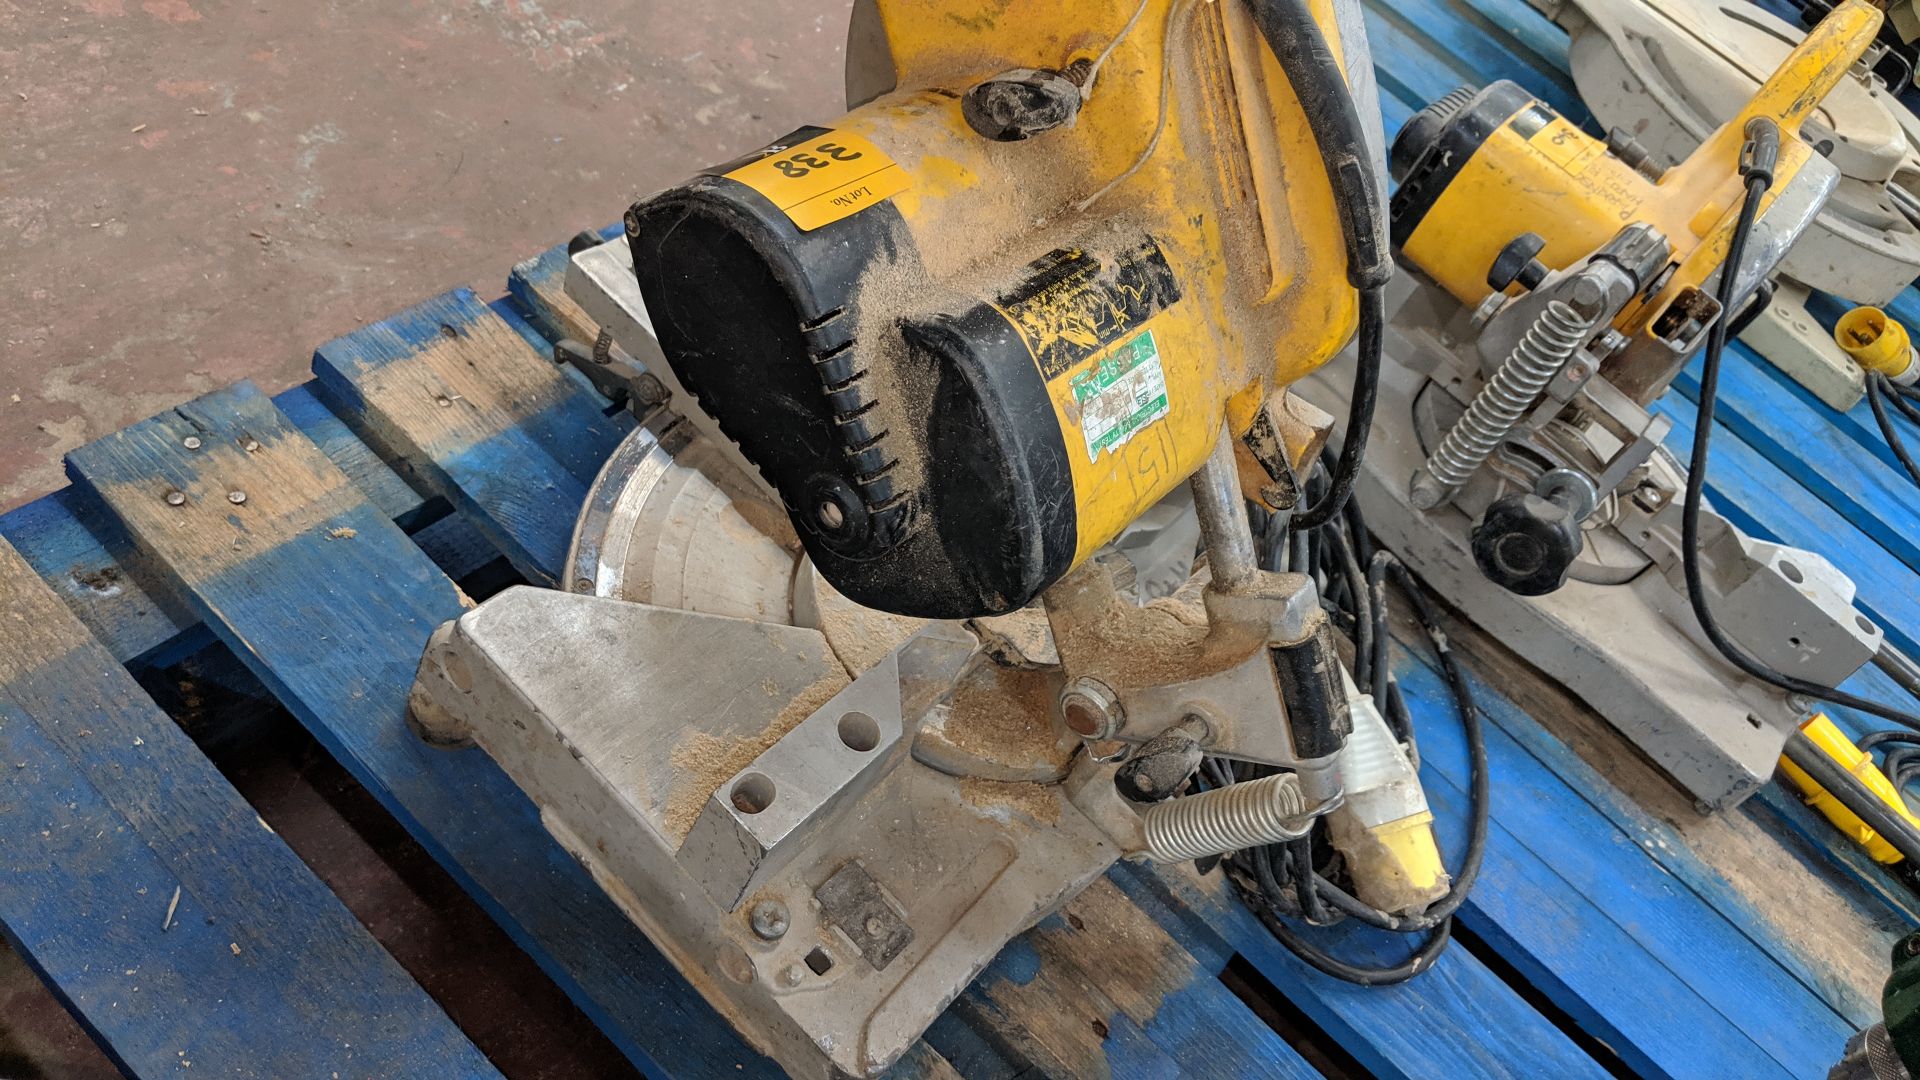 DeWalt 110V mitre saw IMPORTANT: Please remember goods successfully bid upon must be paid for and - Image 5 of 5